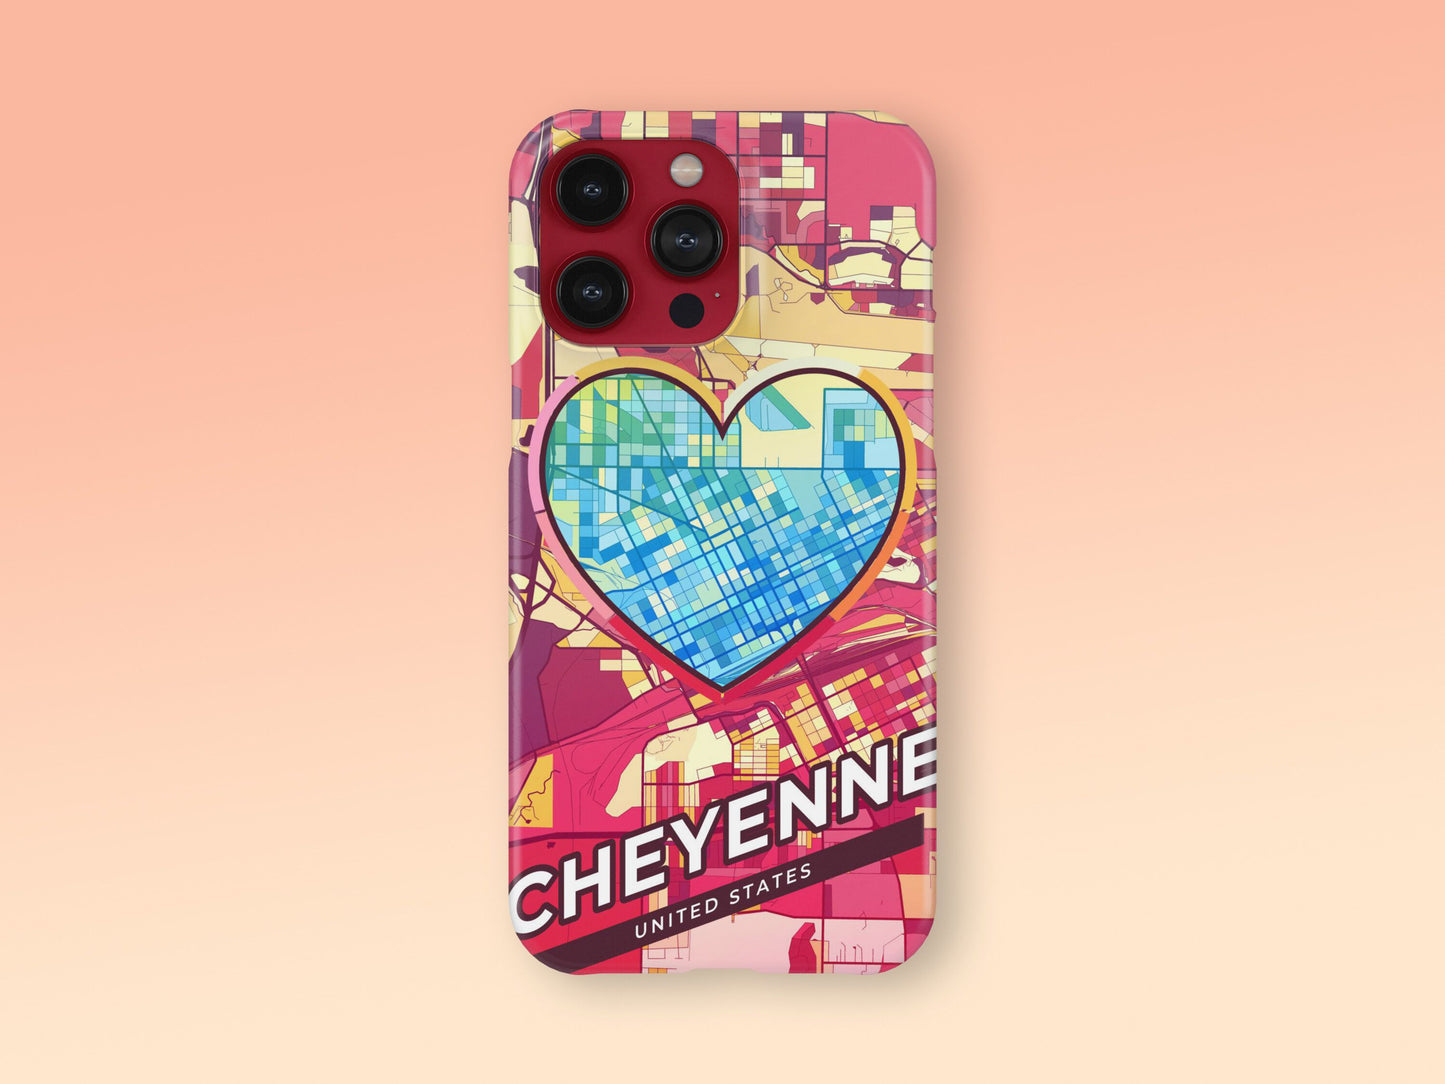 Cheyenne Wyoming slim phone case with colorful icon. Birthday, wedding or housewarming gift. Couple match cases. 2